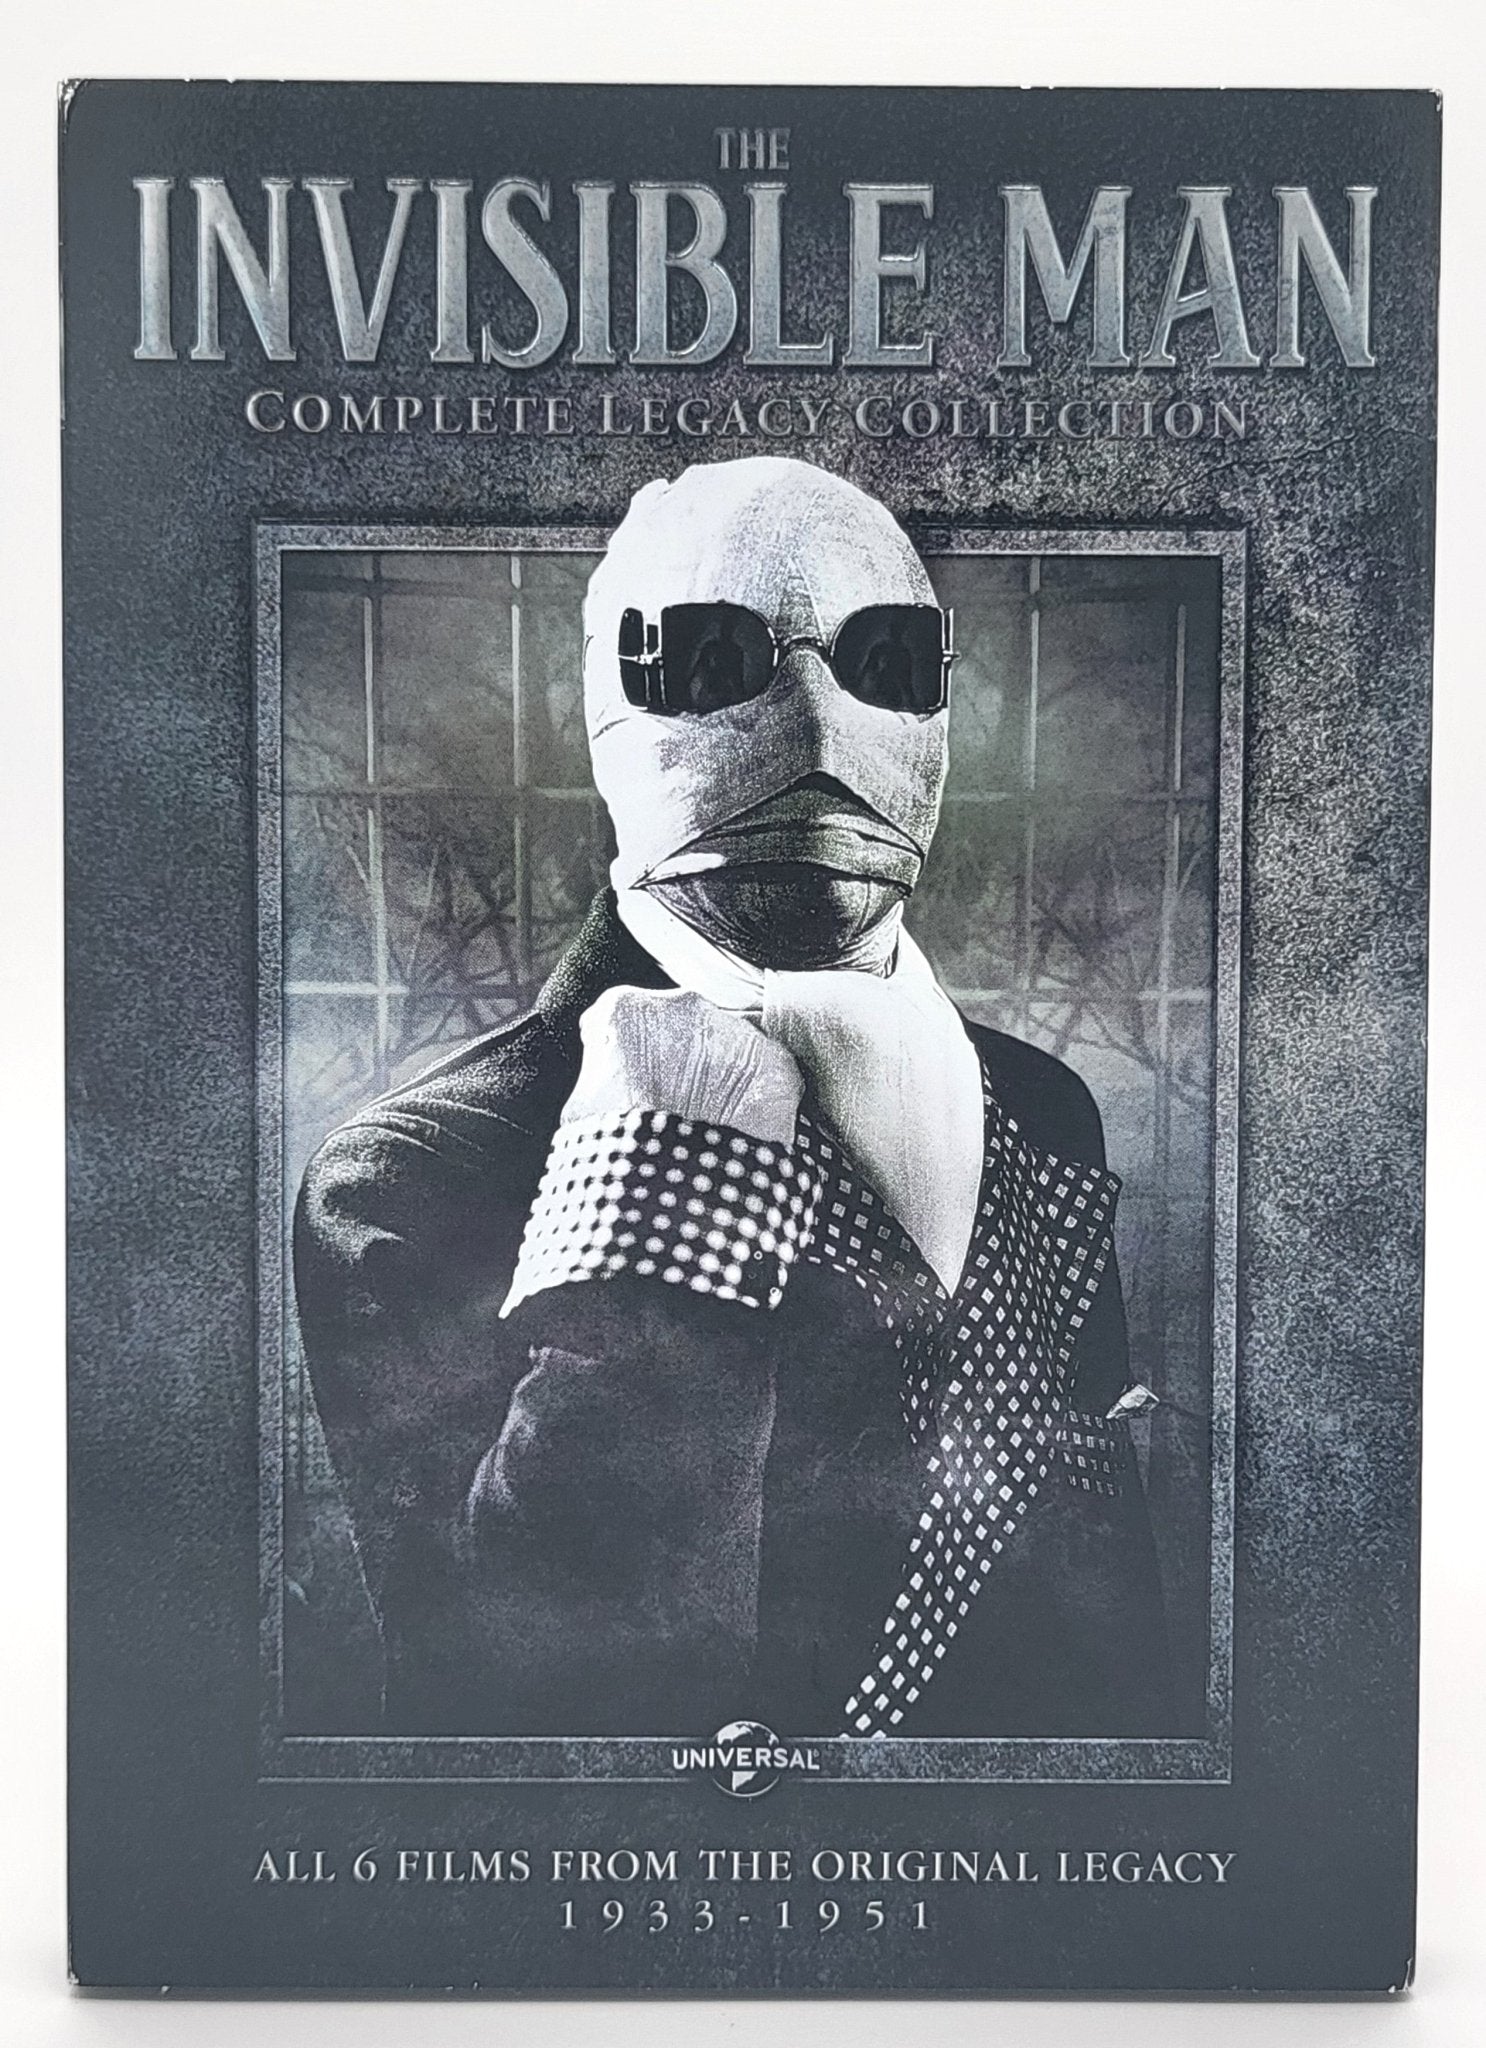 Universal Studios Home Entertainment - The Invisible Man - Complete Legacy Collection - All 6 Films from the original Legacy 1933 - 1951 - DVD - Steady Bunny Shop